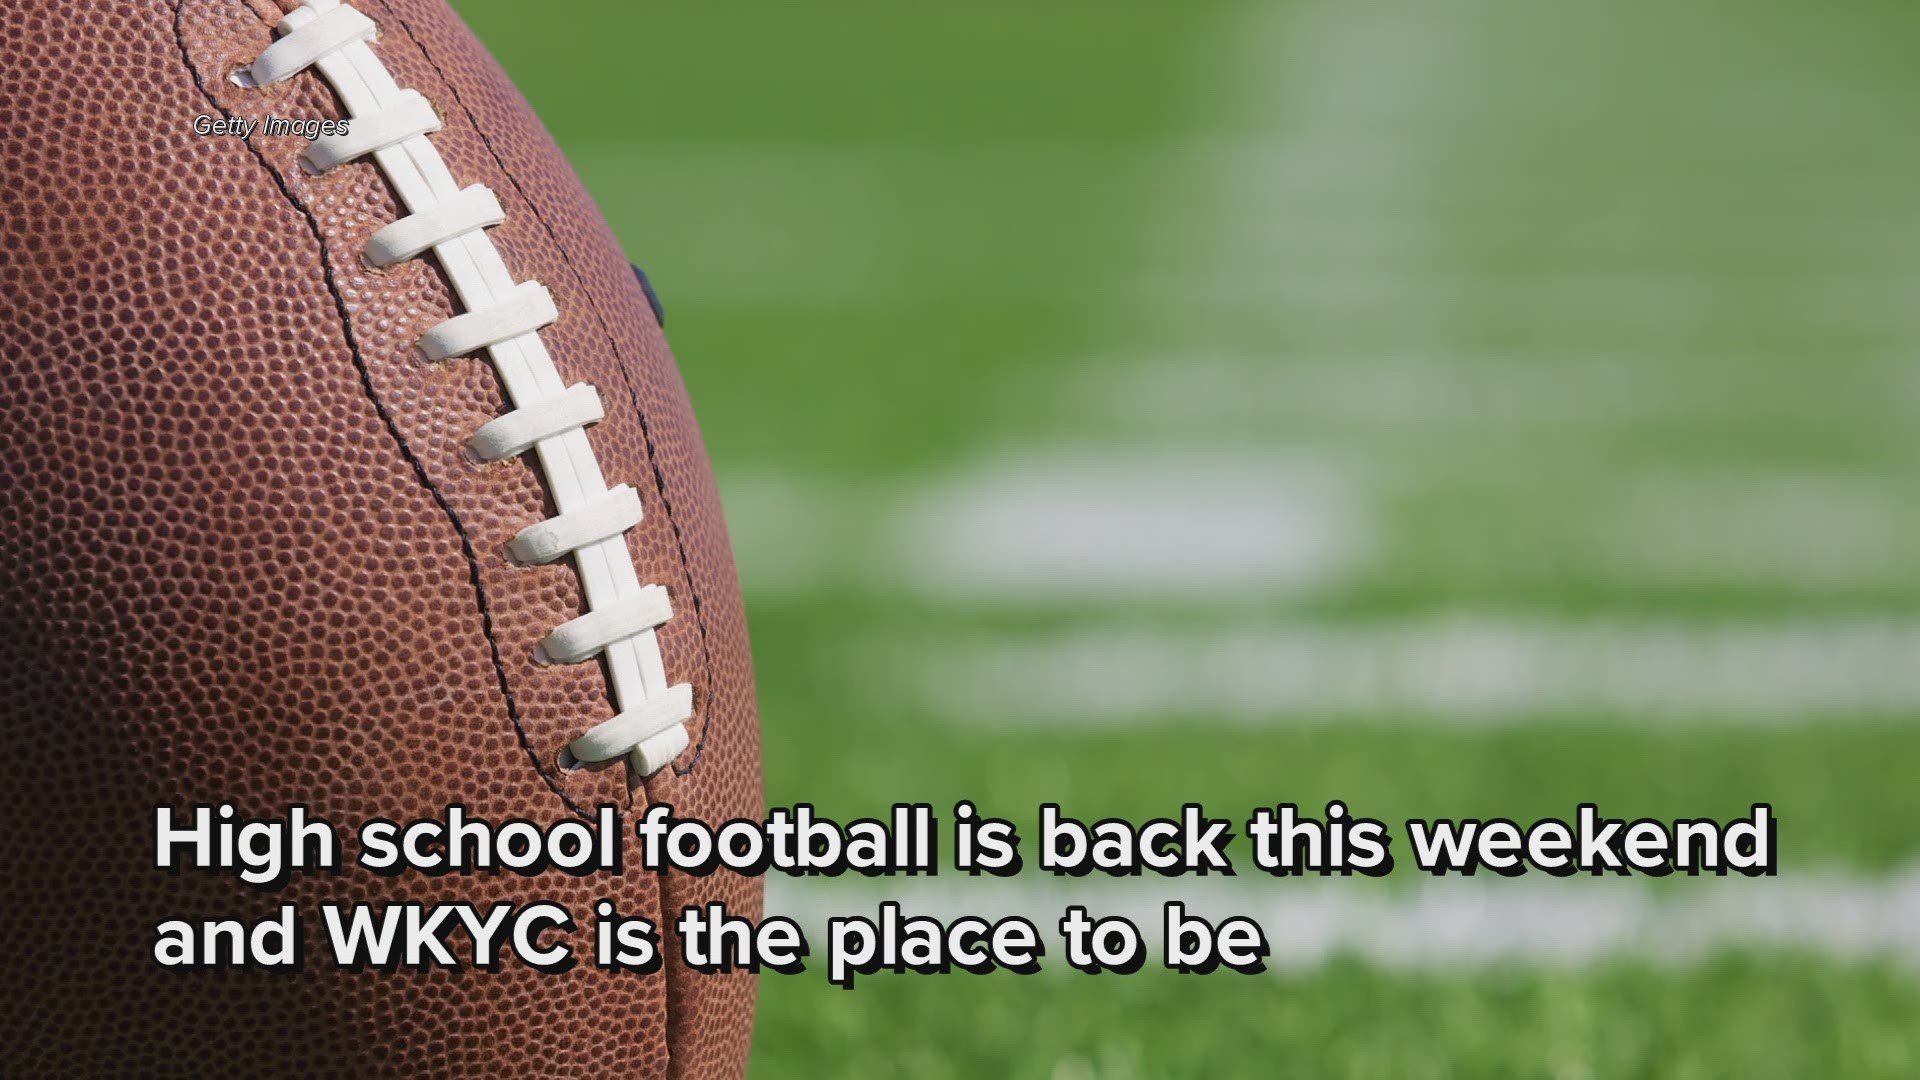 Vote for WKYC.com's High School Football Game of the Week!